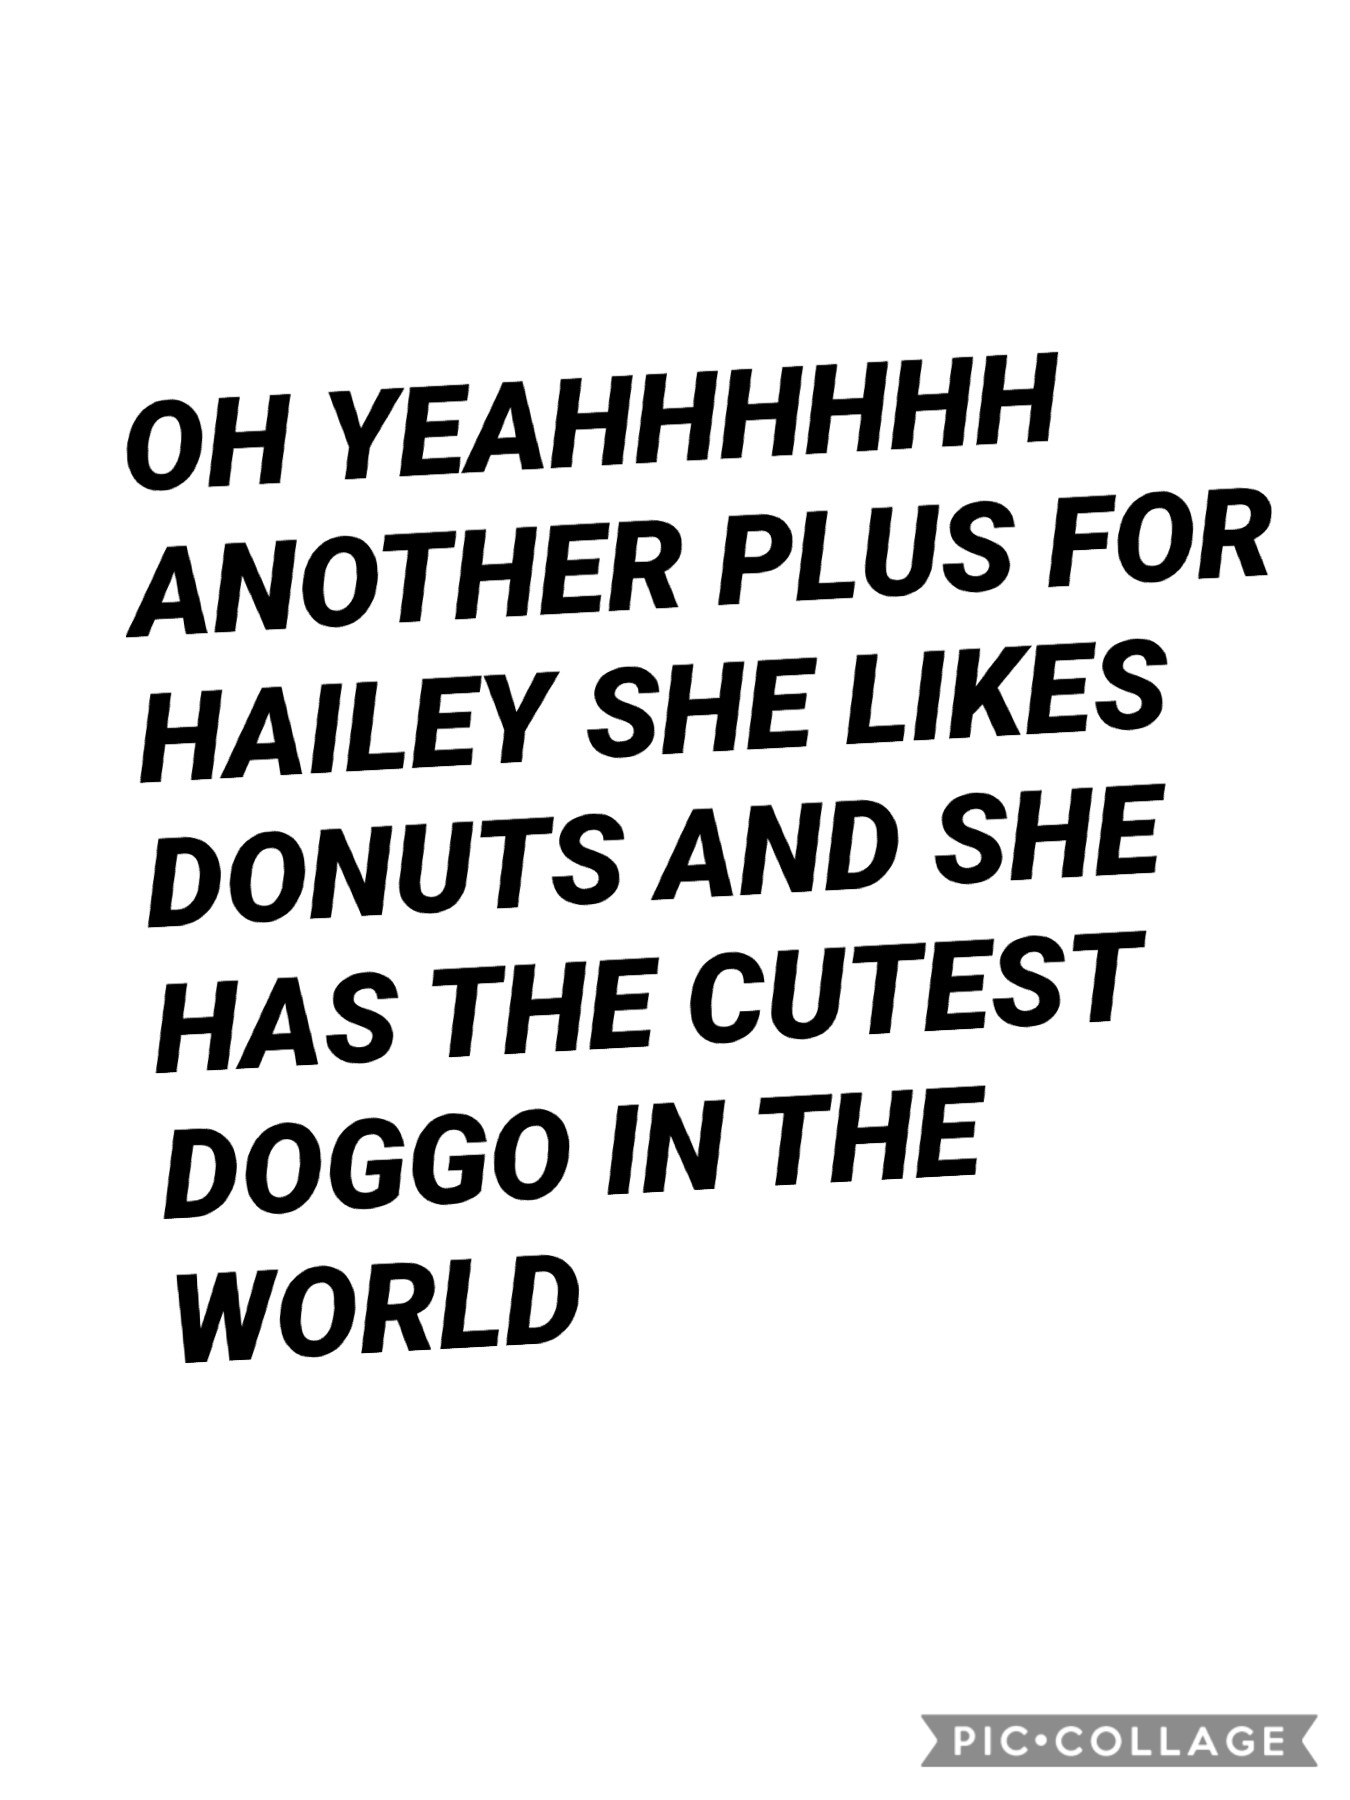 DOGGOS AND DONUT WHO DOESNT LOVE THAT😂😂😂